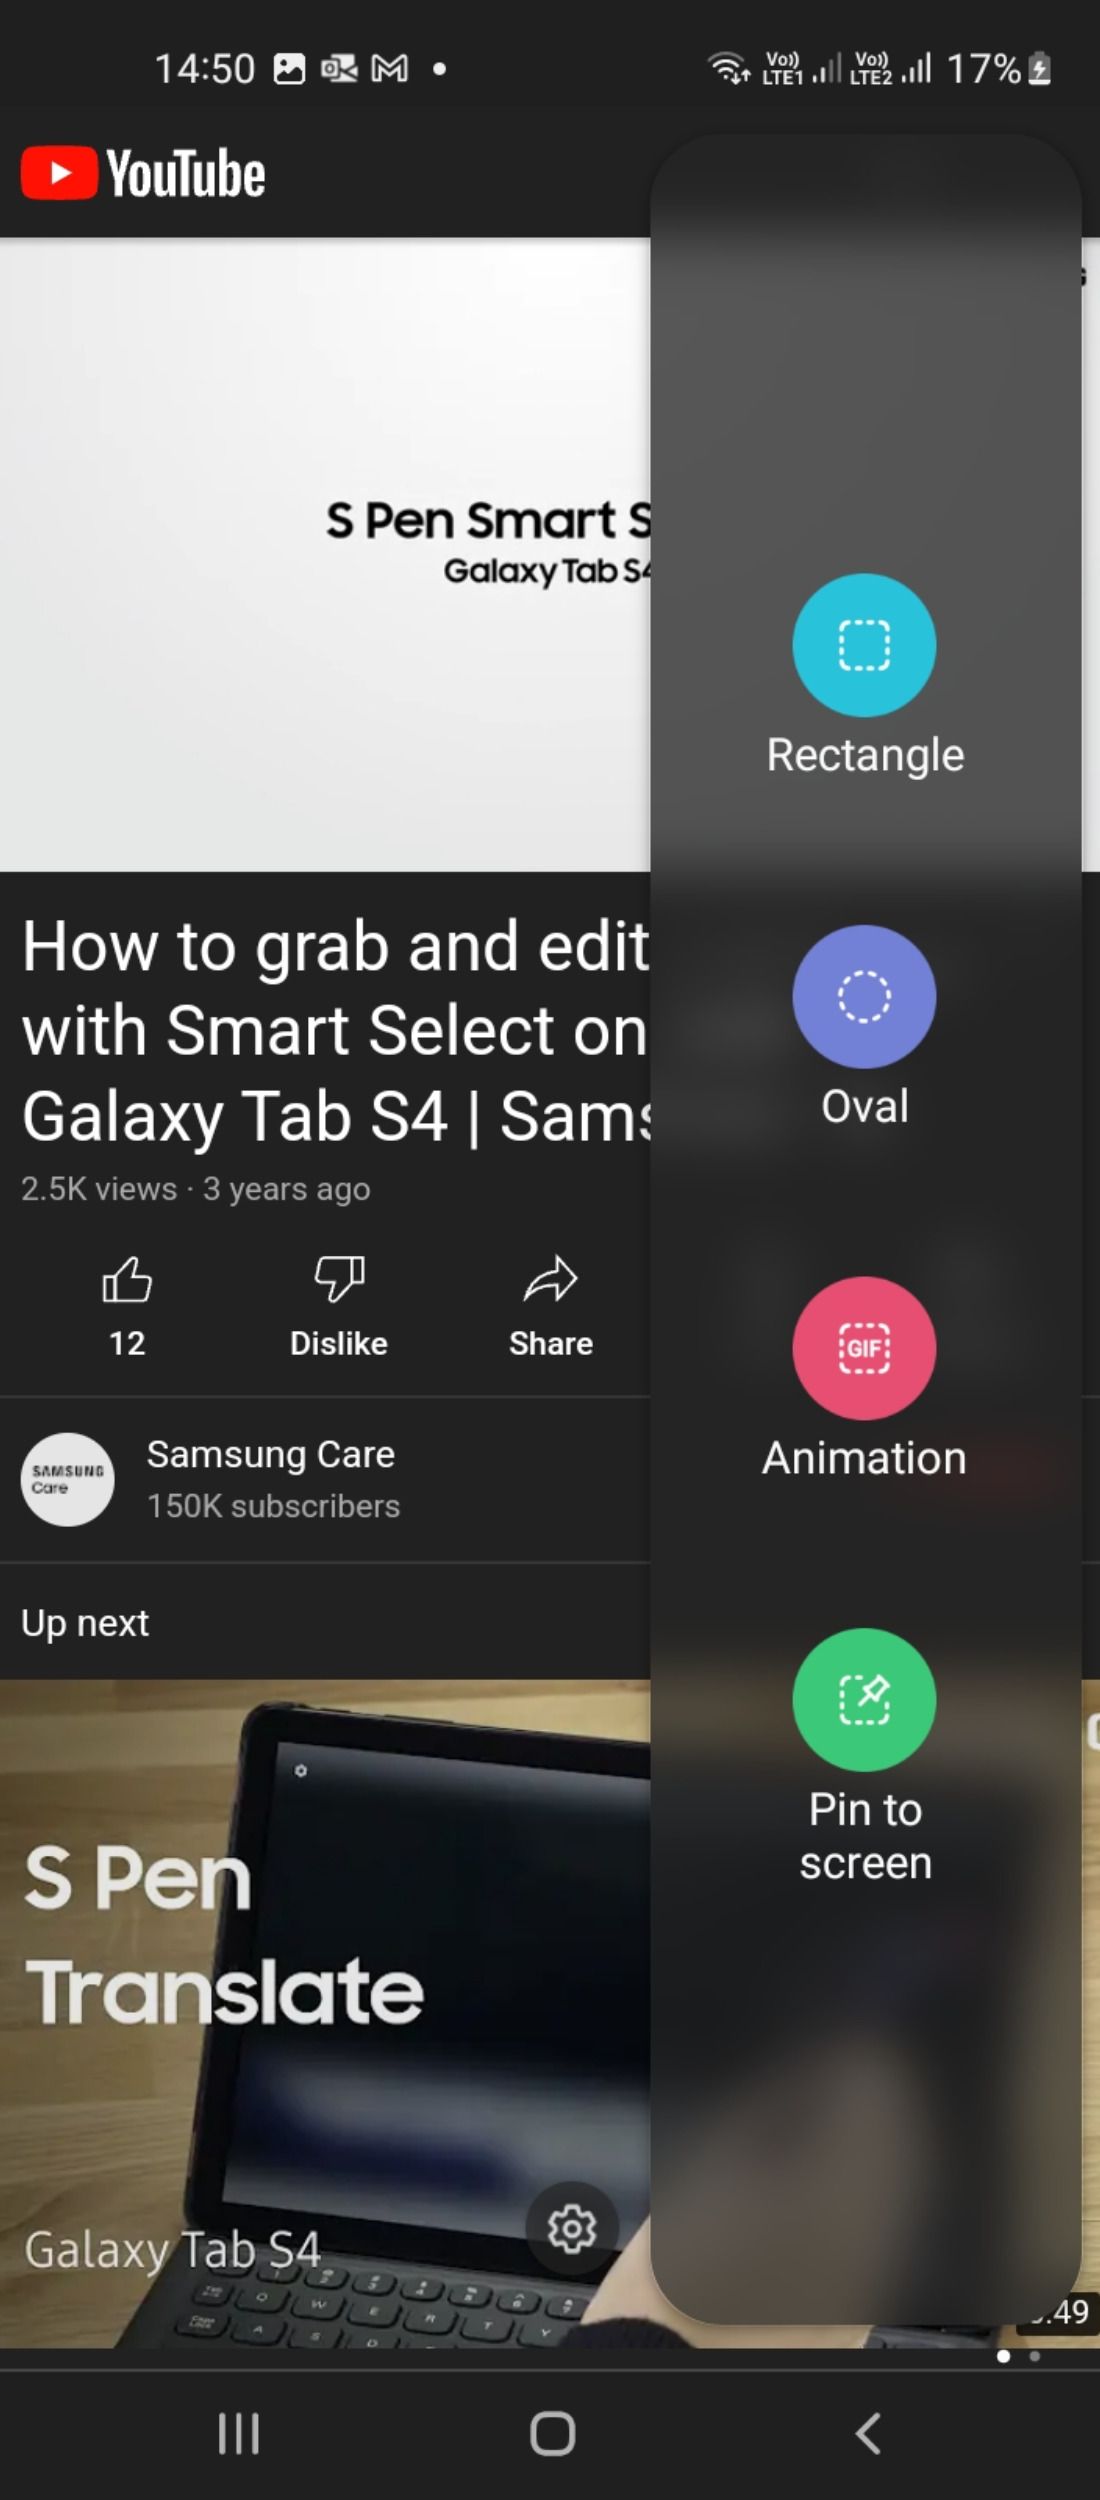 GIFanimation features in Samsung Smart select